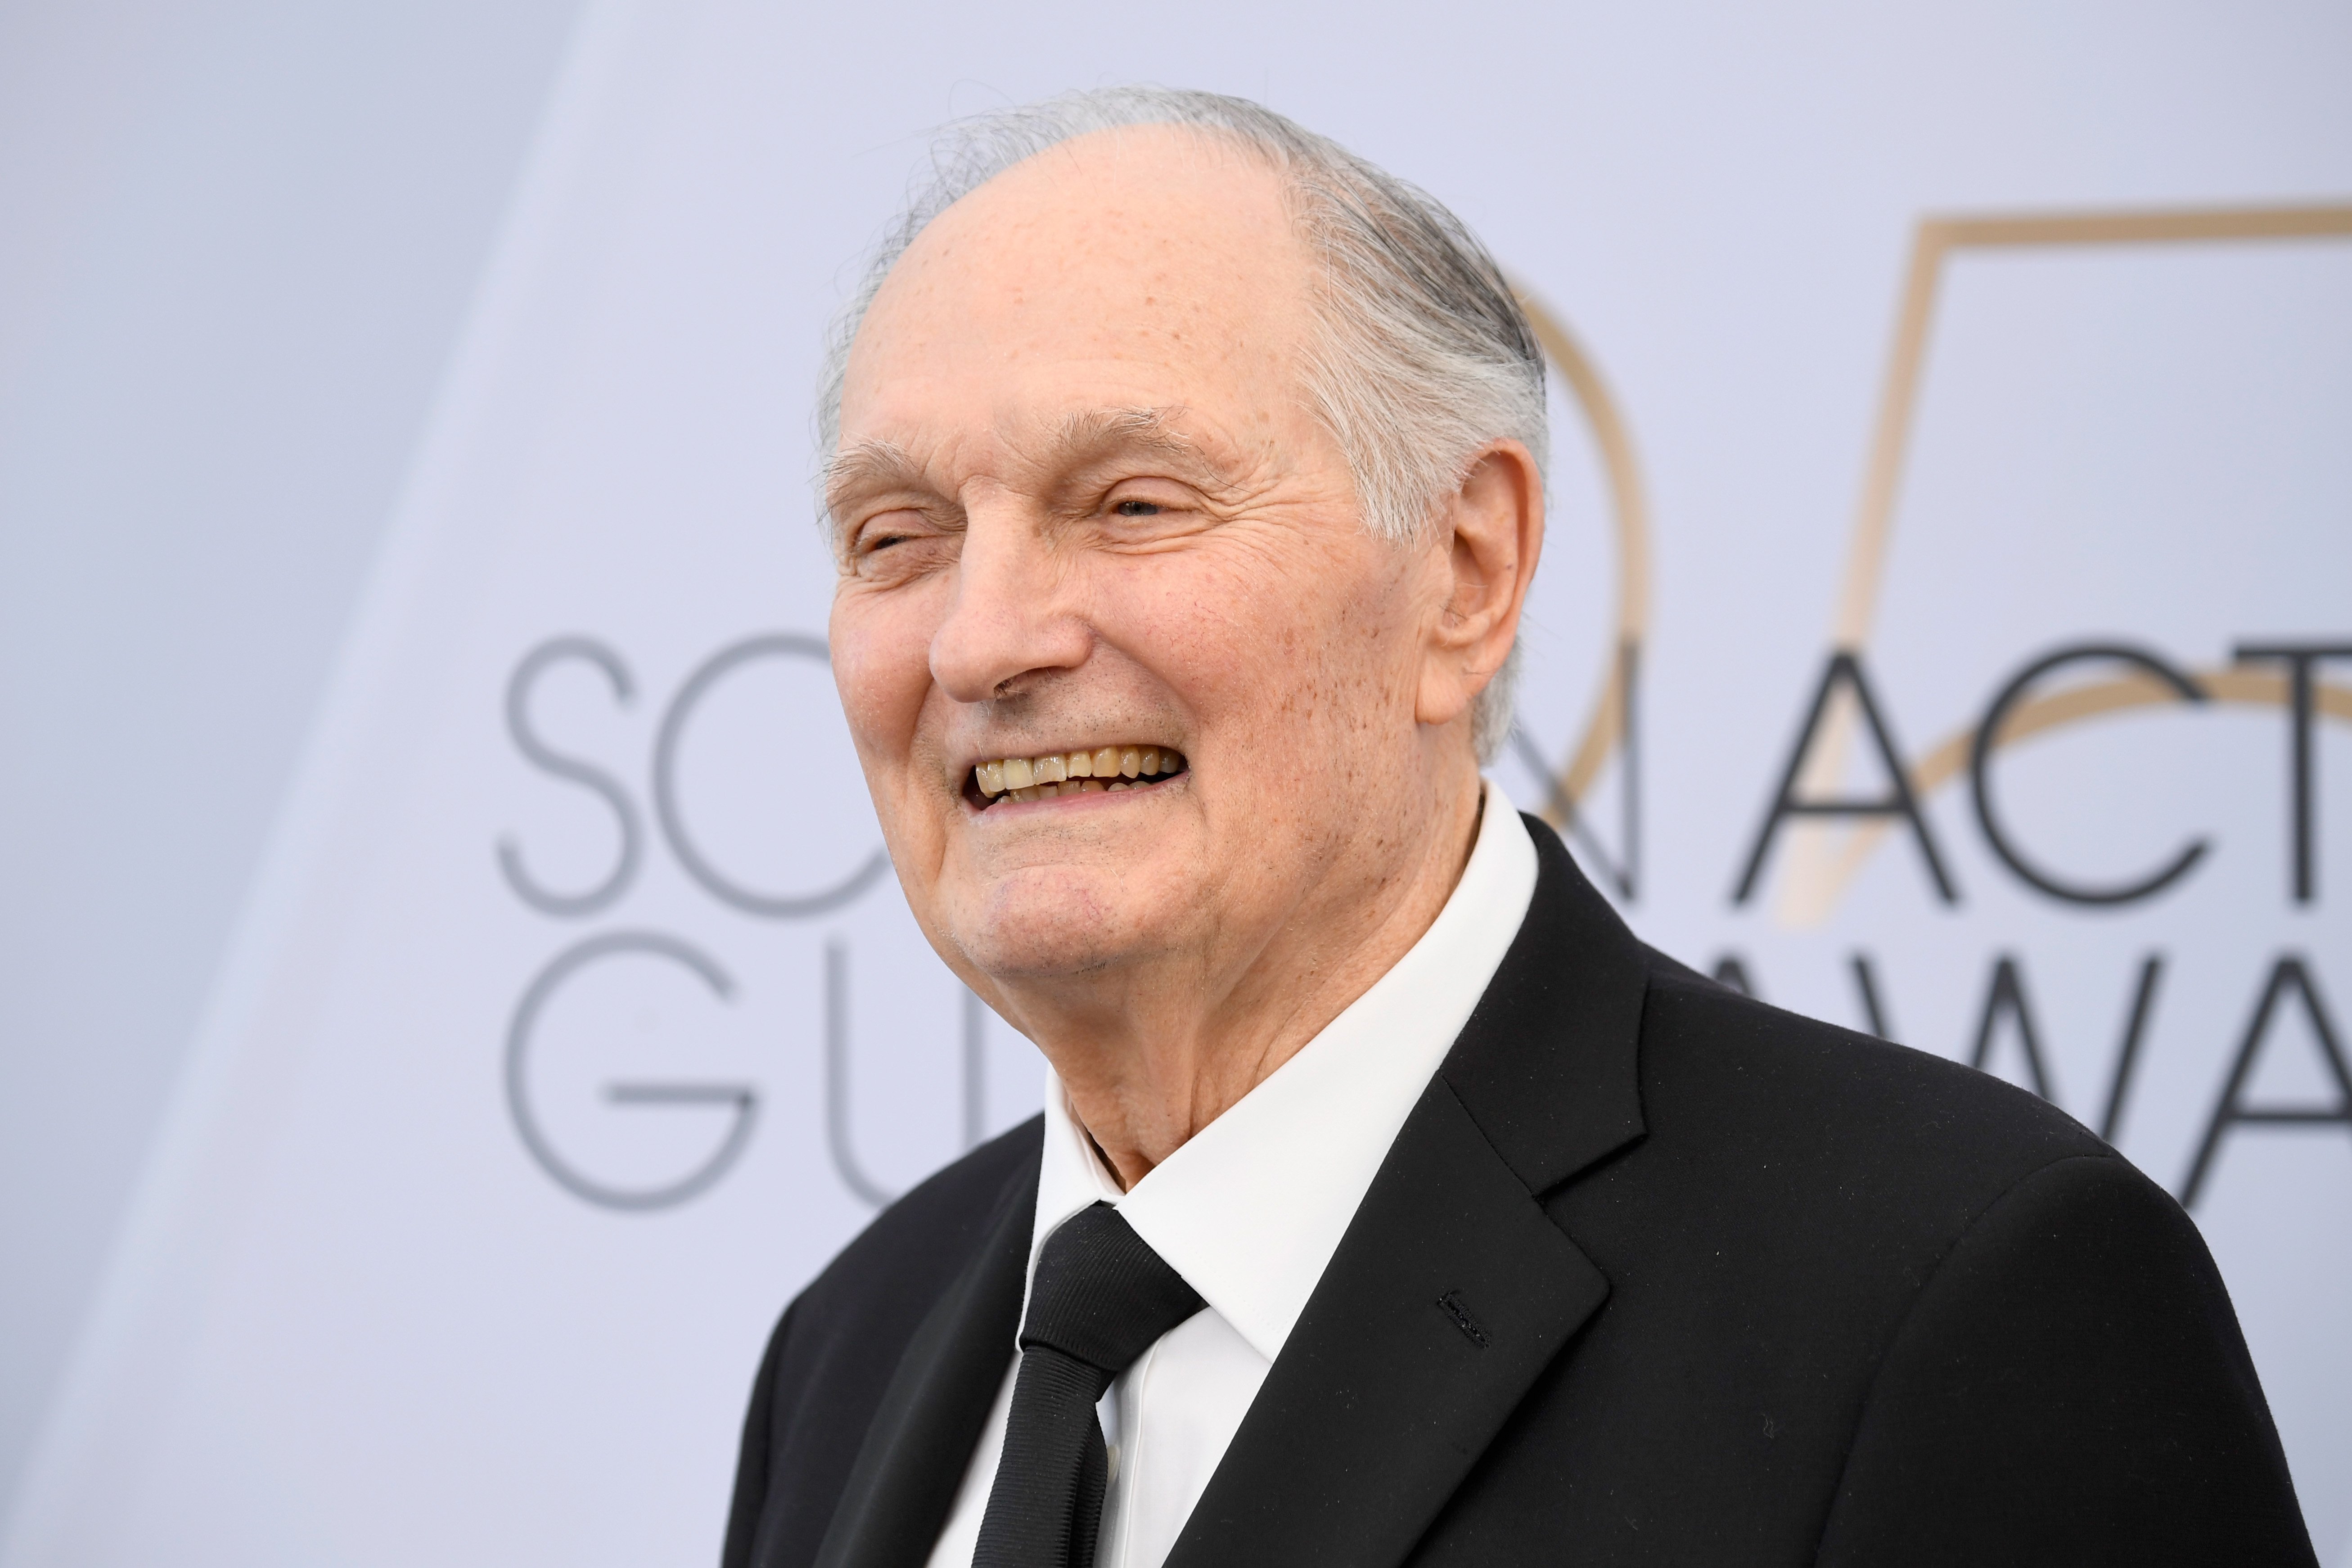 Alan Alda at the 25th Annual Screen Actors Guild Awards on January 27, 2019 in Los Angeles, California. | Source: Getty Images